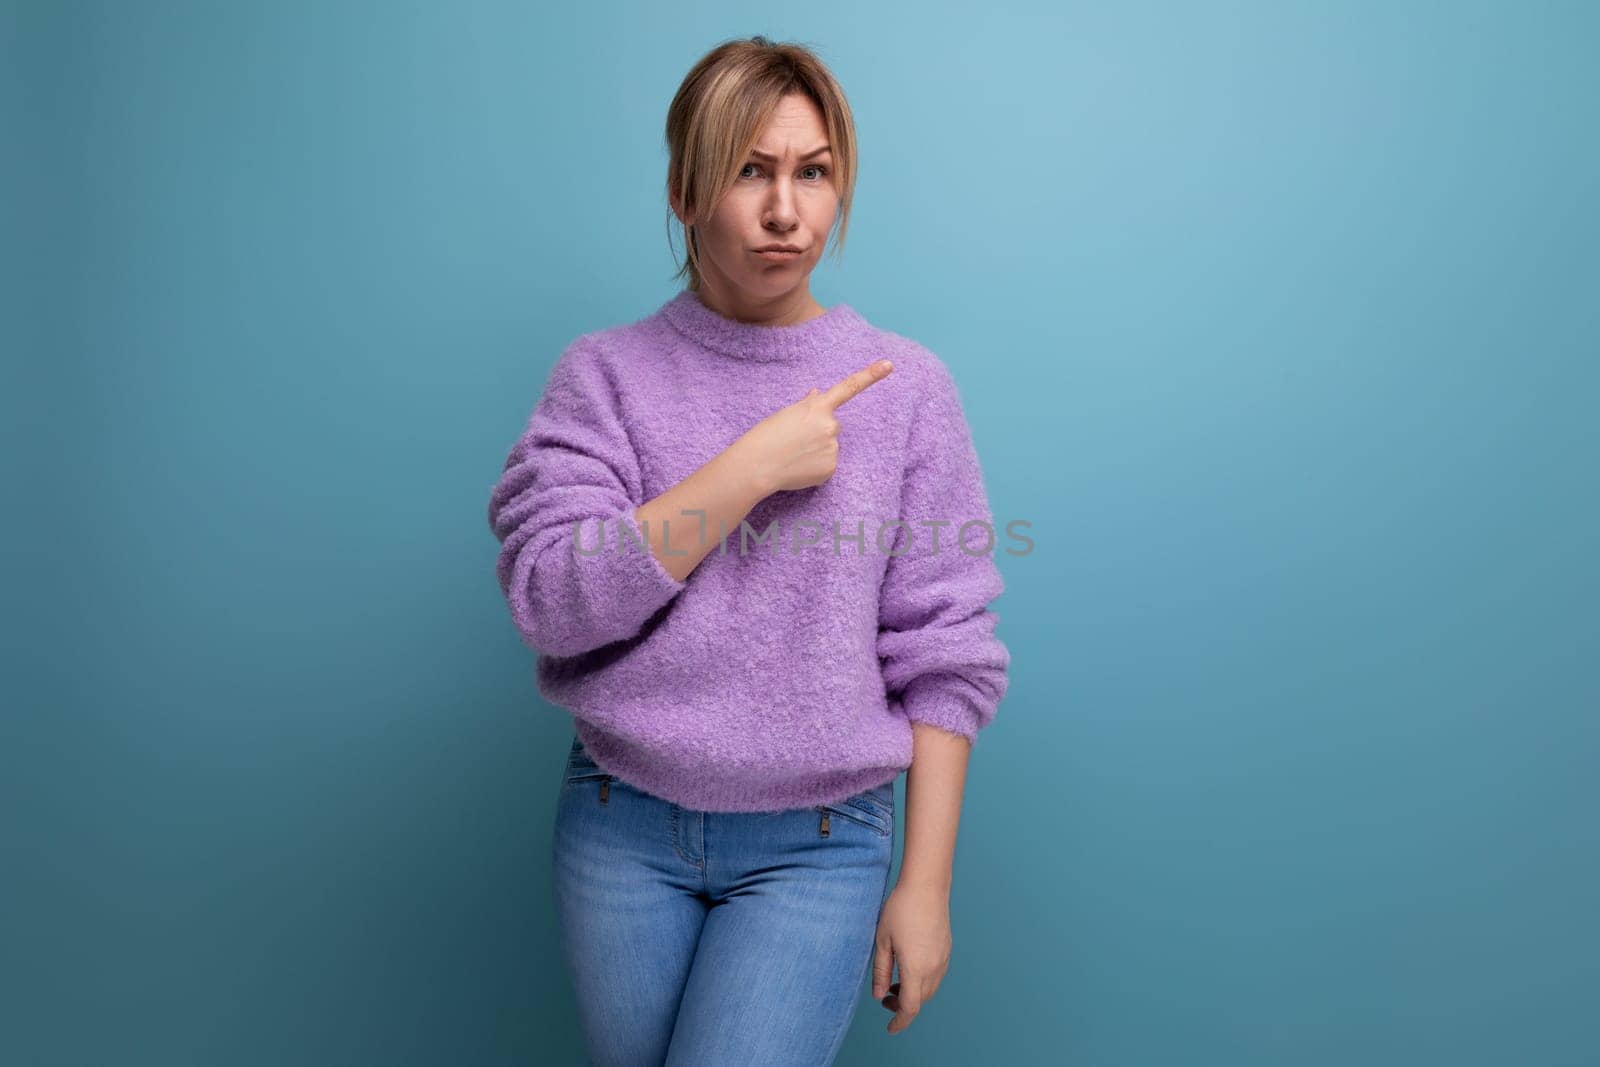 indignant blond young woman in a purple hoodie pointing to the side in surprise on a blue background with copy space.